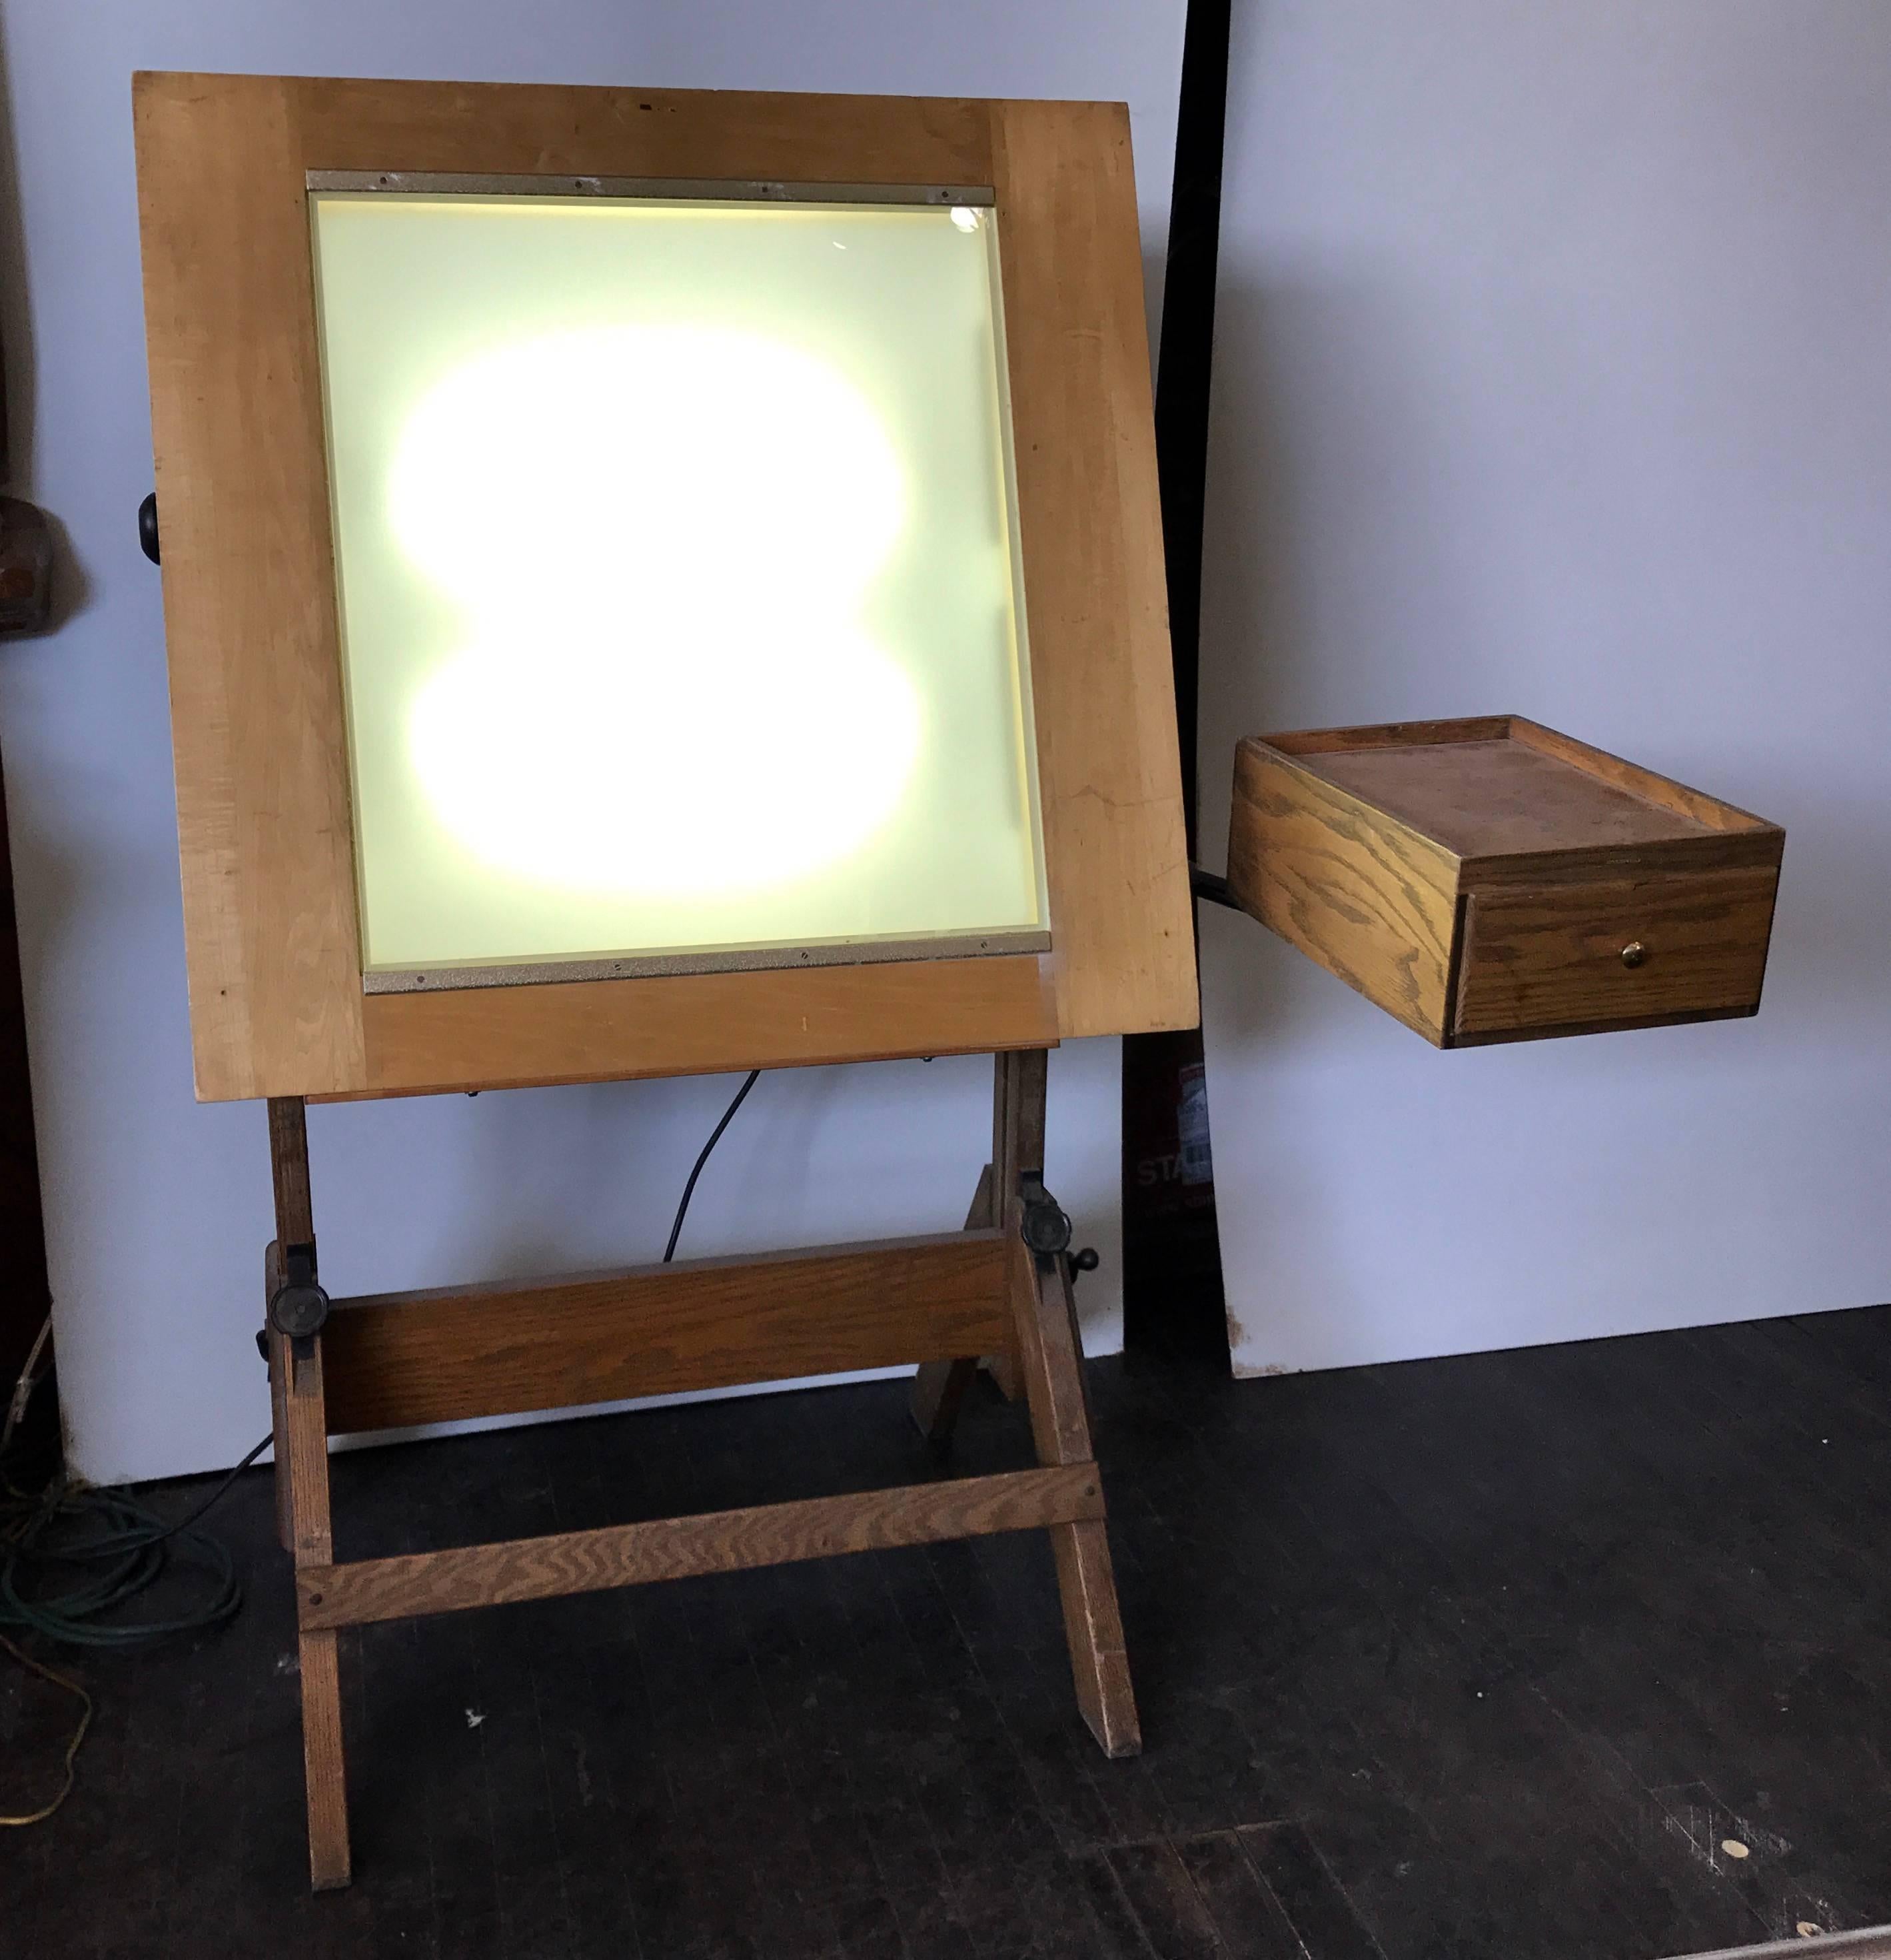 This vintage Hamilton drafting light table would be perfect tracing, opaquing, stripping, transparency, and slide viewing. The angle of the tabletop and the height of the desk are easily adjustable as well as the pivoting top, elusive swing out